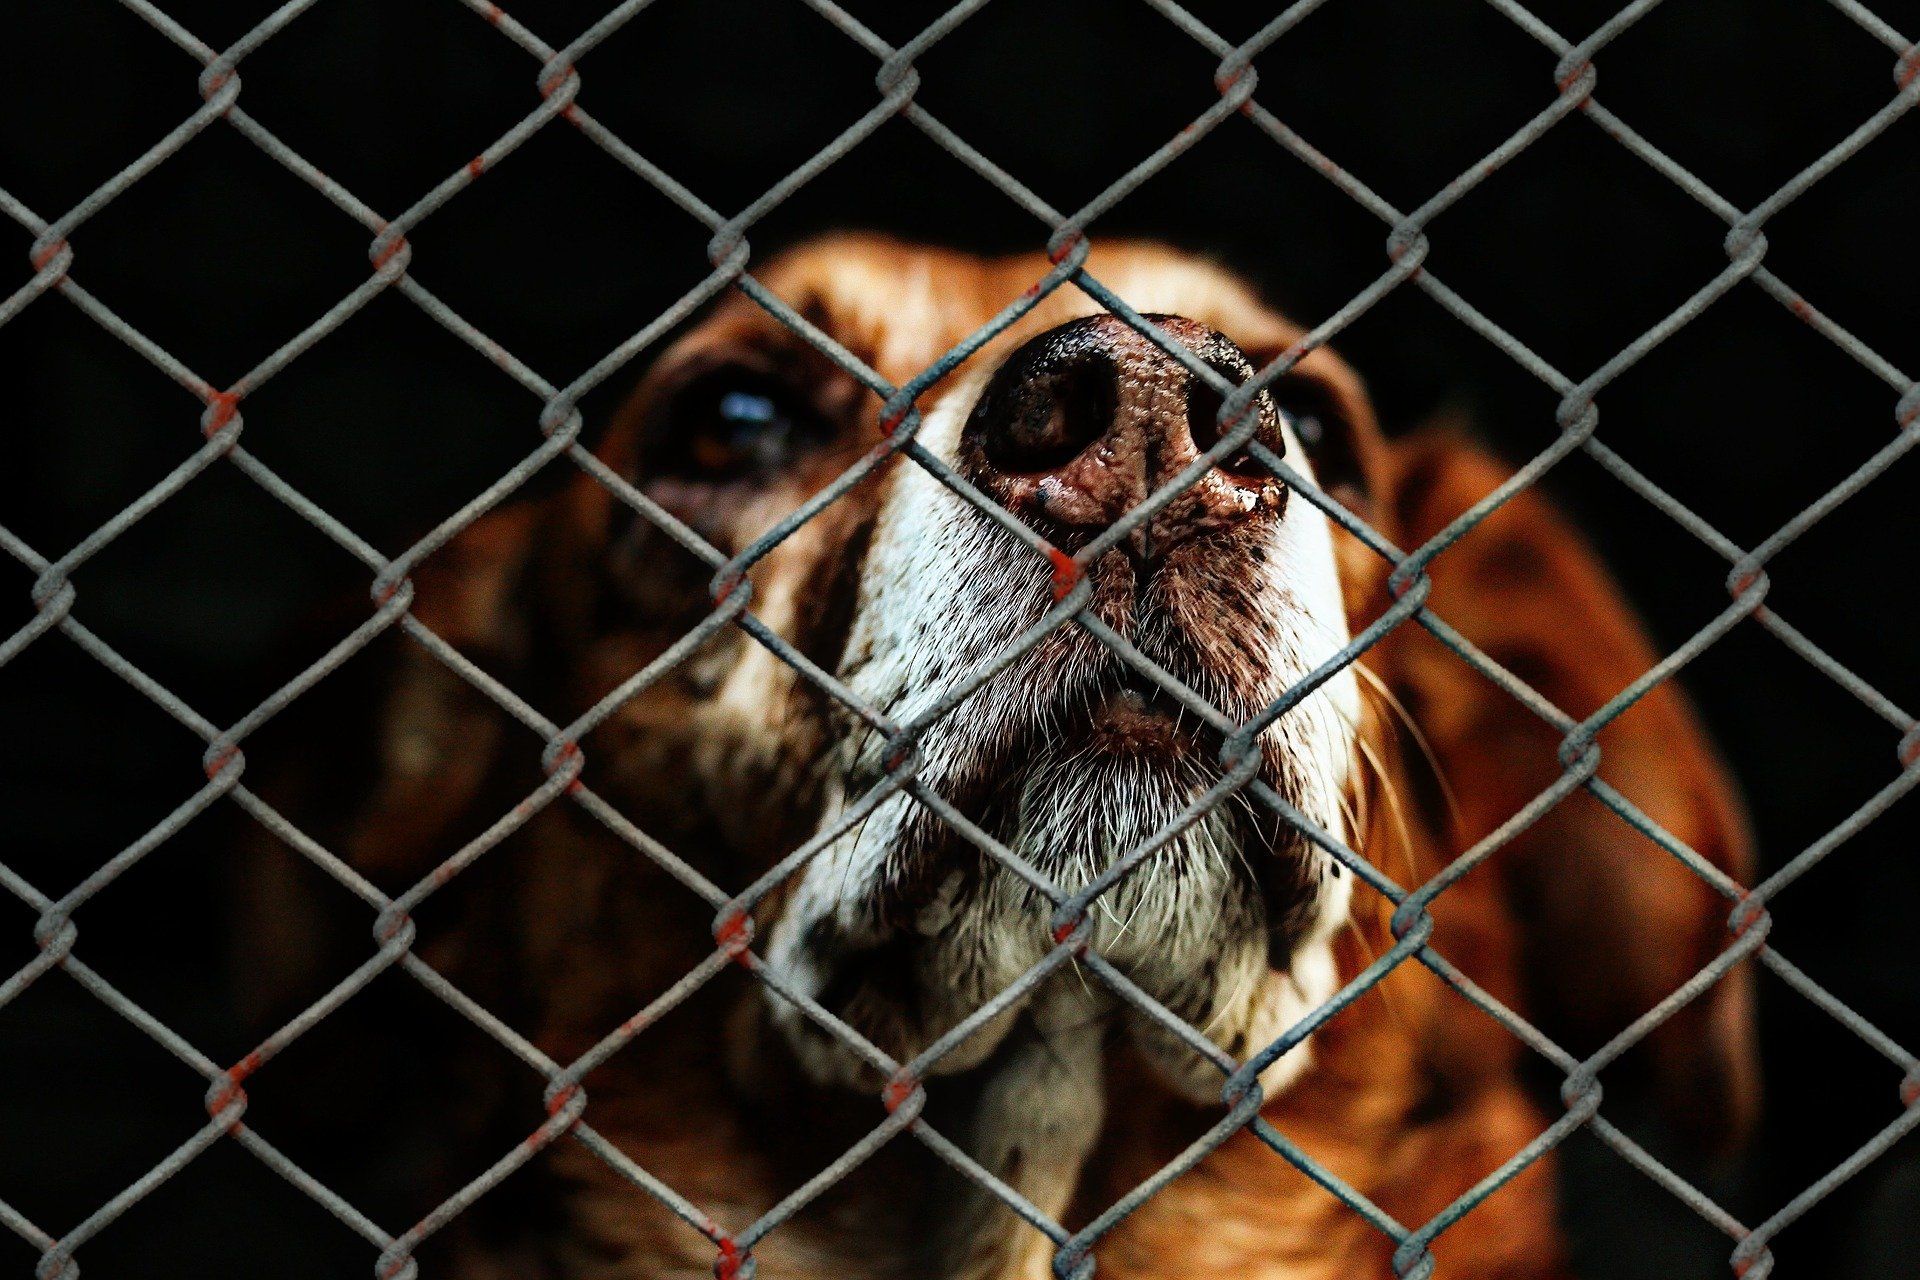 Lost dog looks sadly out from behind kennel wires